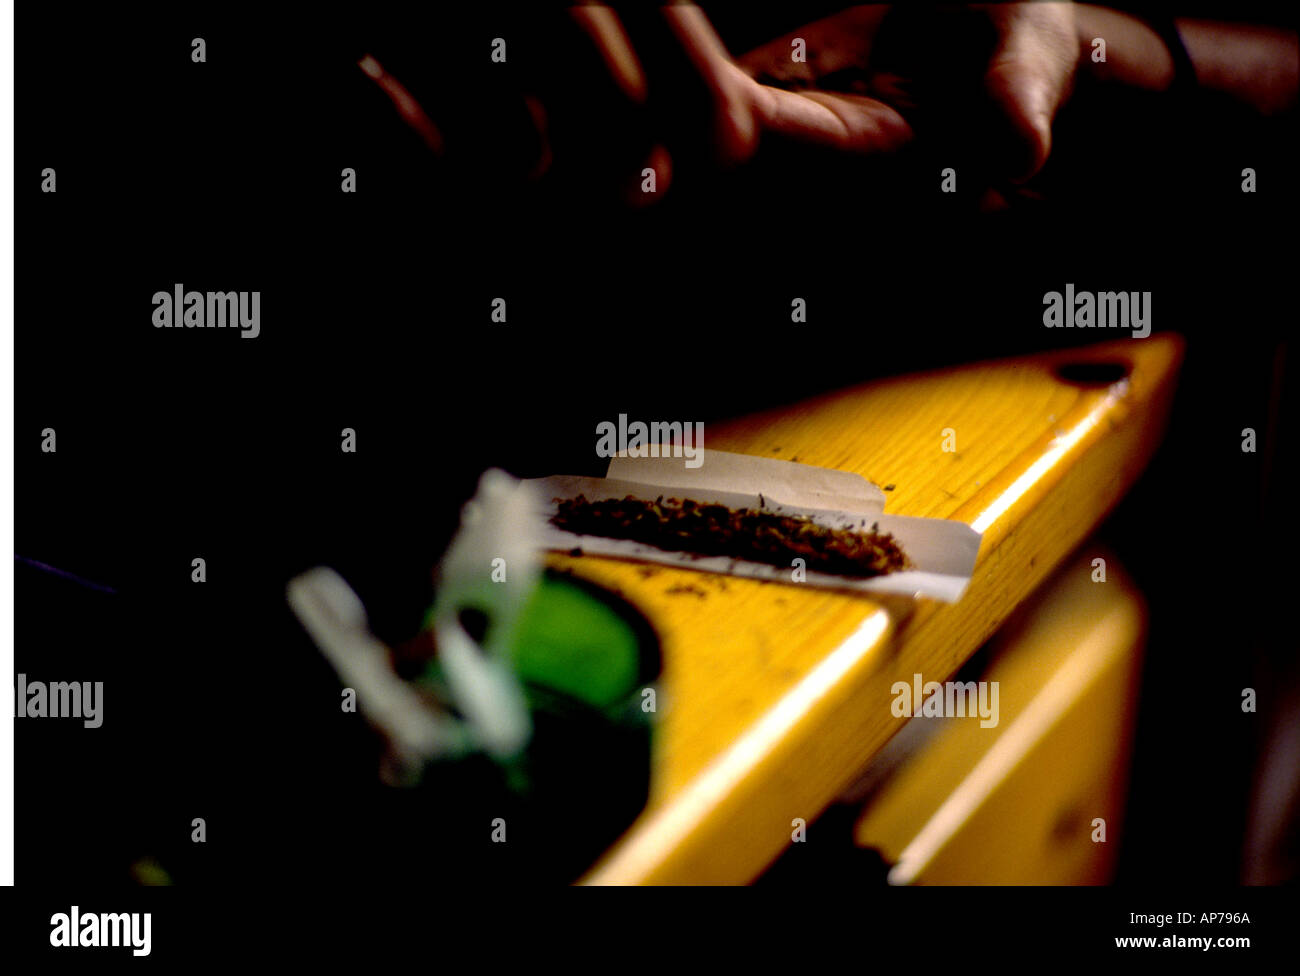 Joint with tobacco & cigarette rolling papers, being rolled on arm of chair. Stock Photo